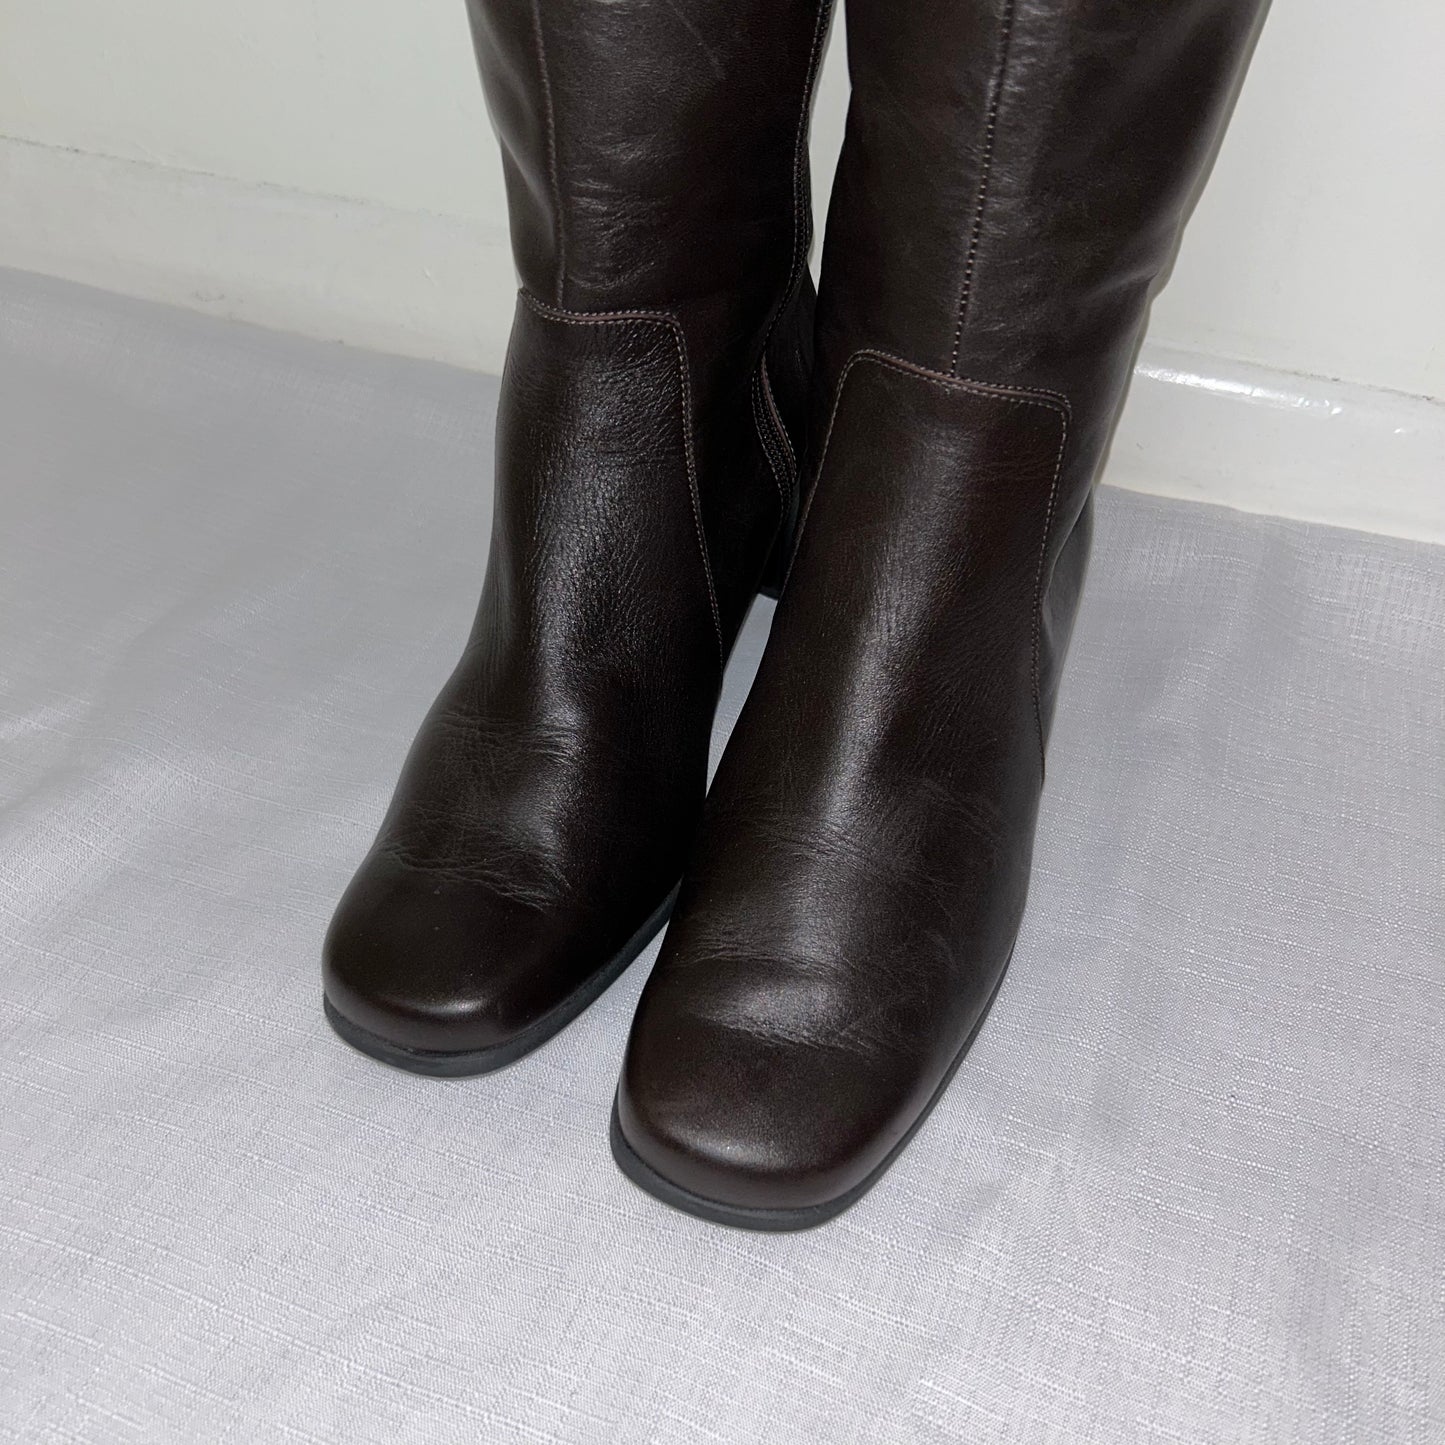 toes of dark brown leather knee high boots shown on a white background